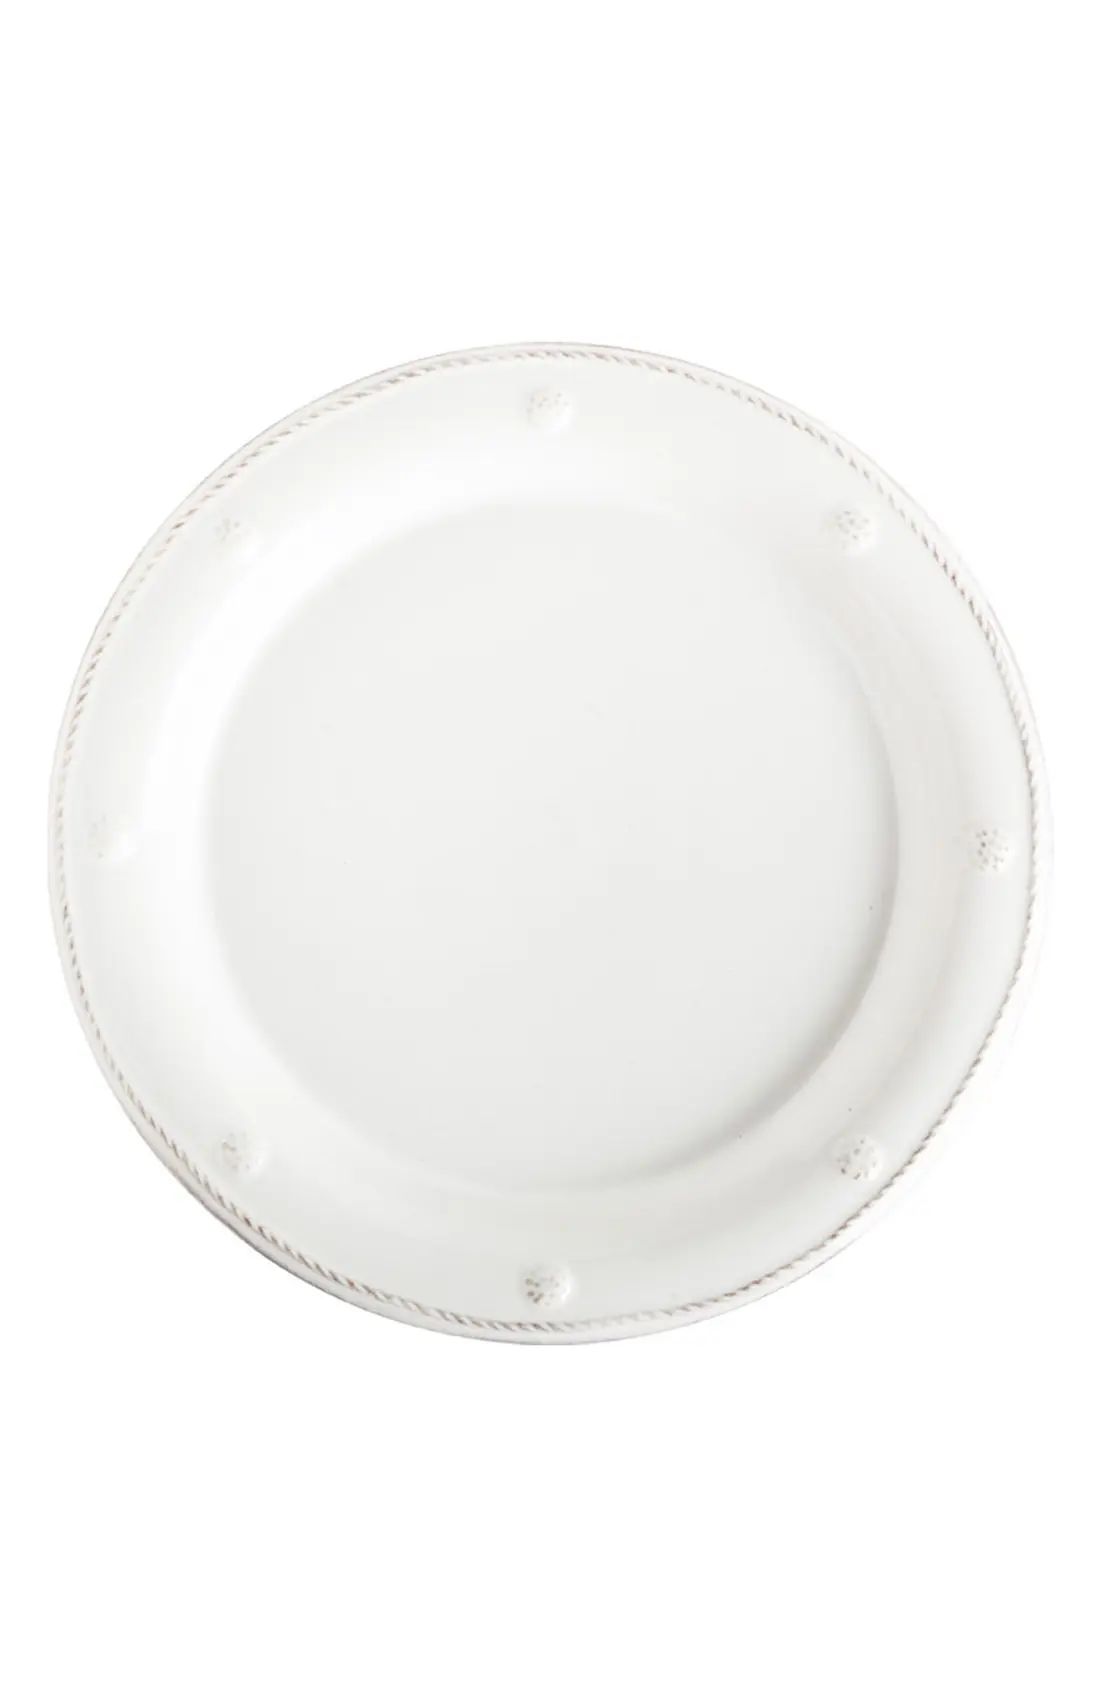 Juliska 'Berry And Thread' Salad Plate, Size One Size - White | Nordstrom